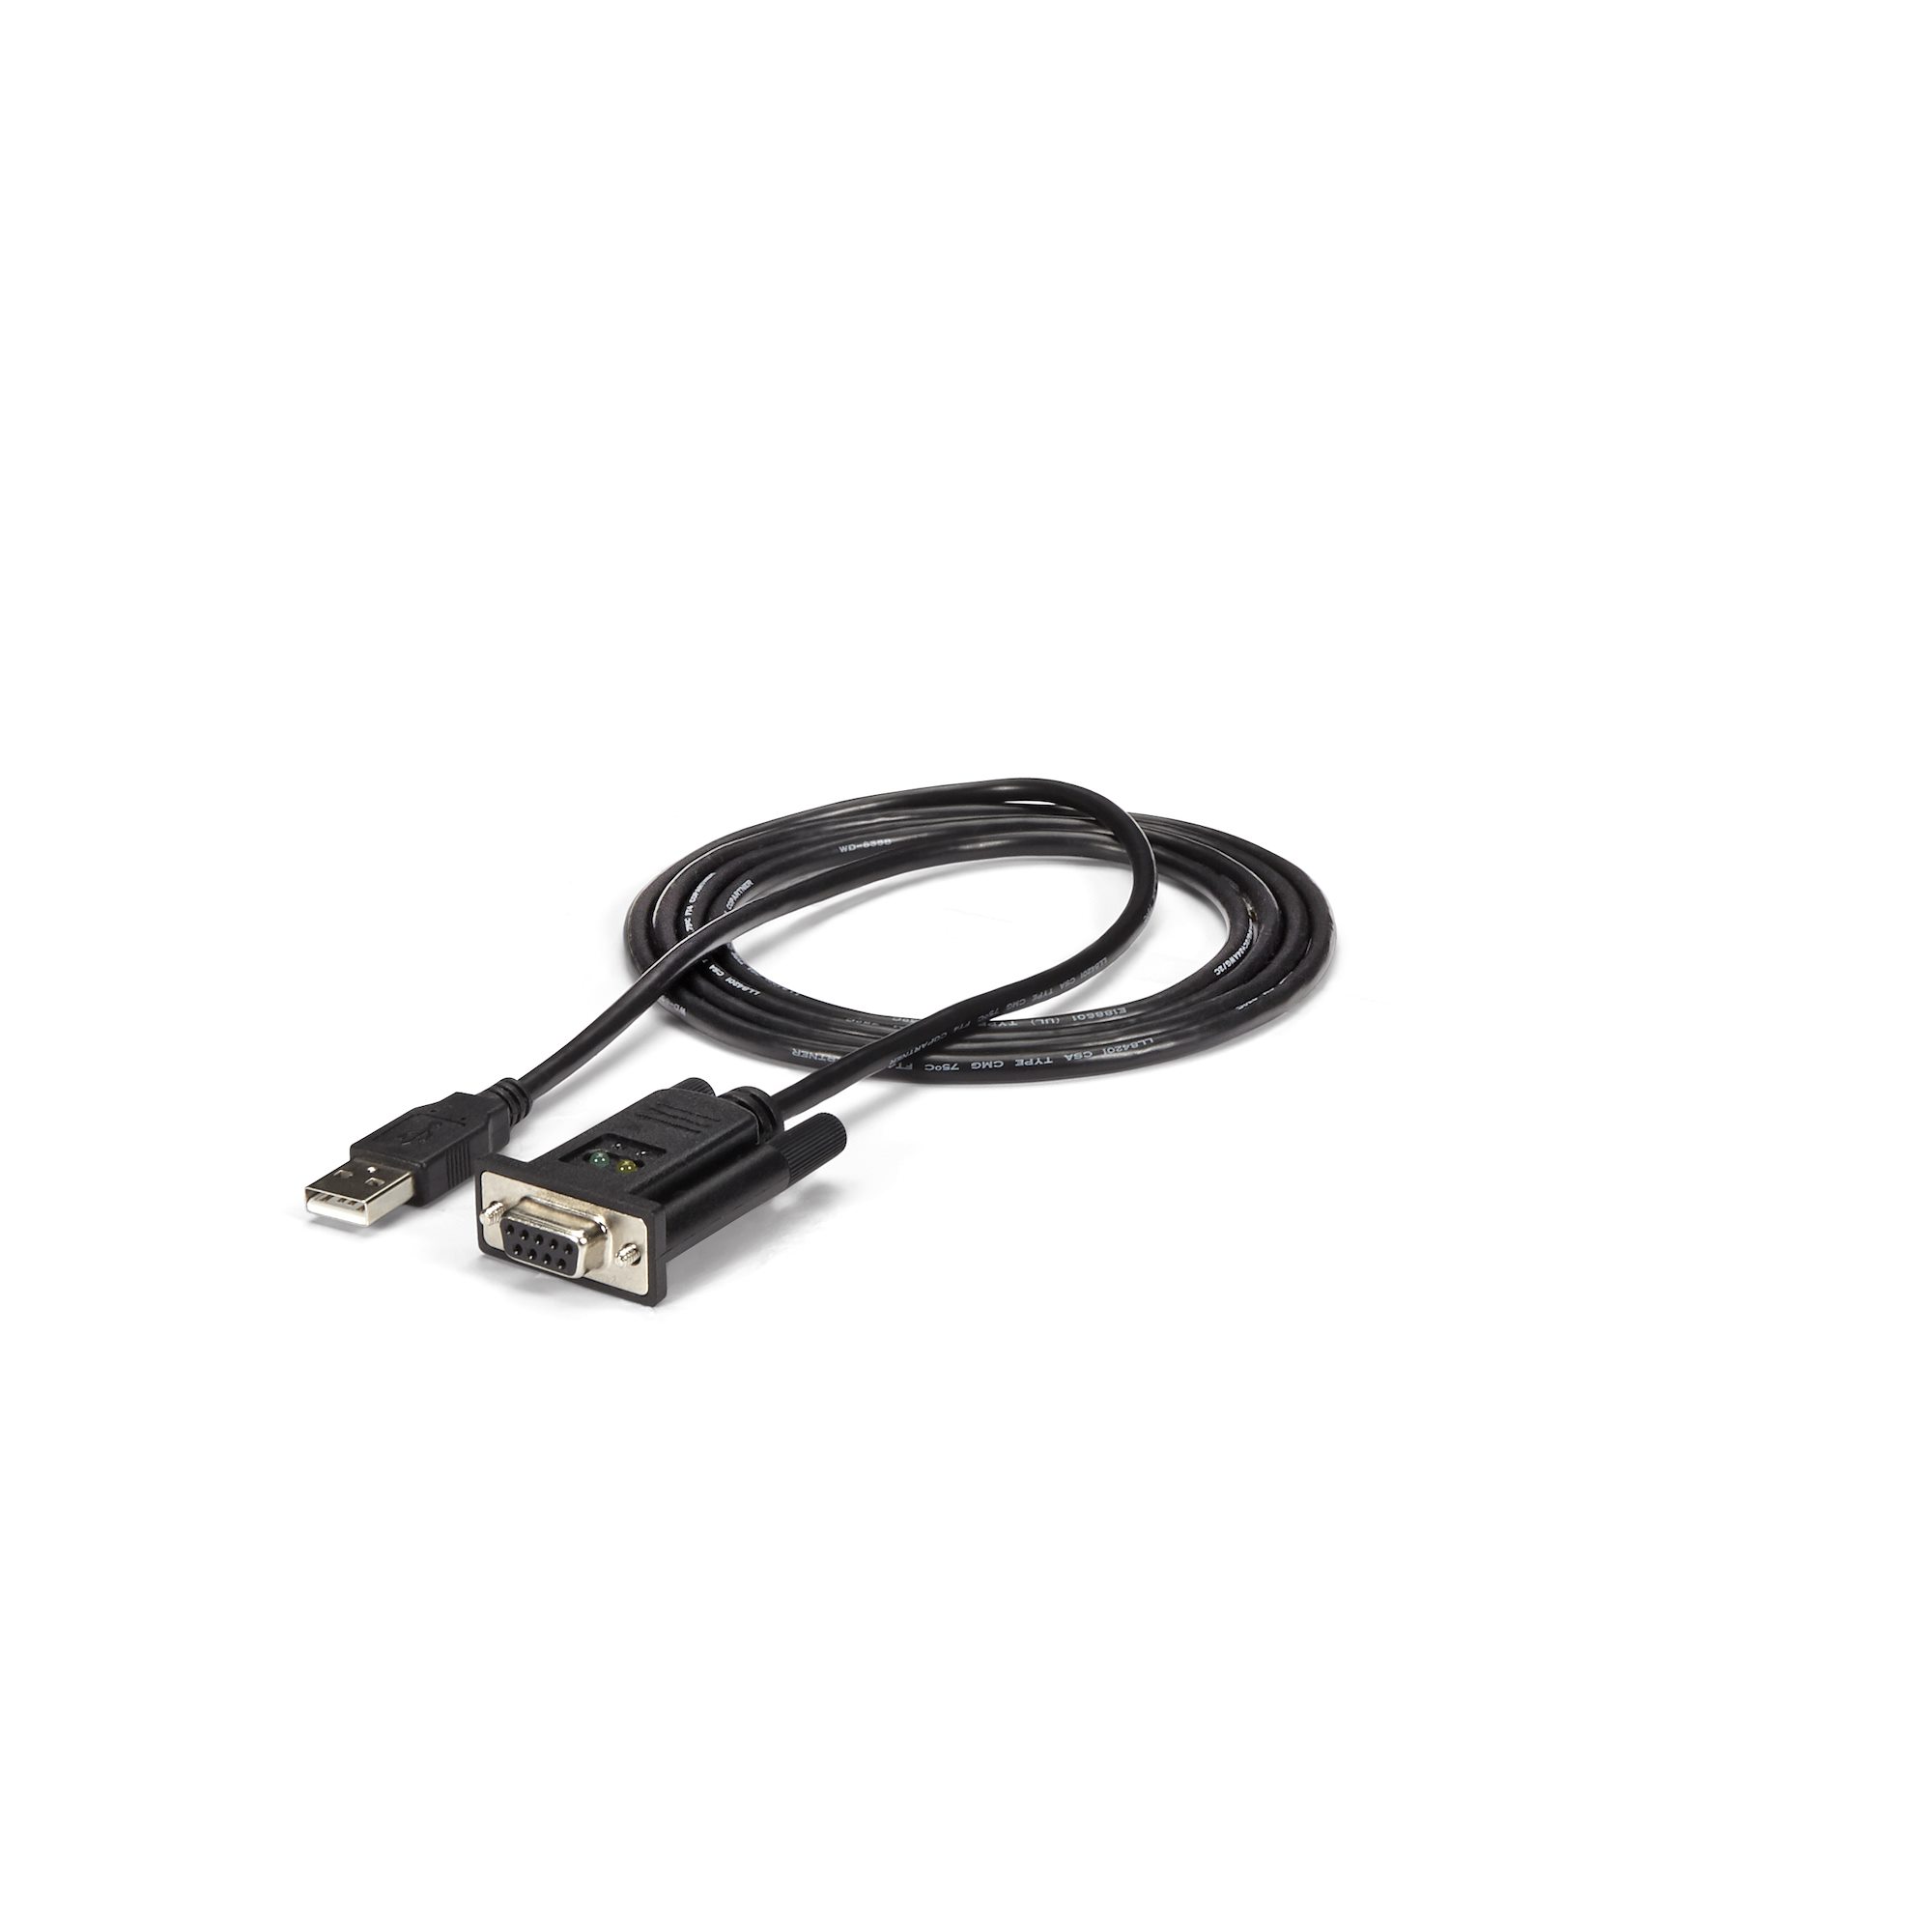 1.8m USB to Serial Adapter FTDI CHIPSET RS232 WIN 10 DB9 